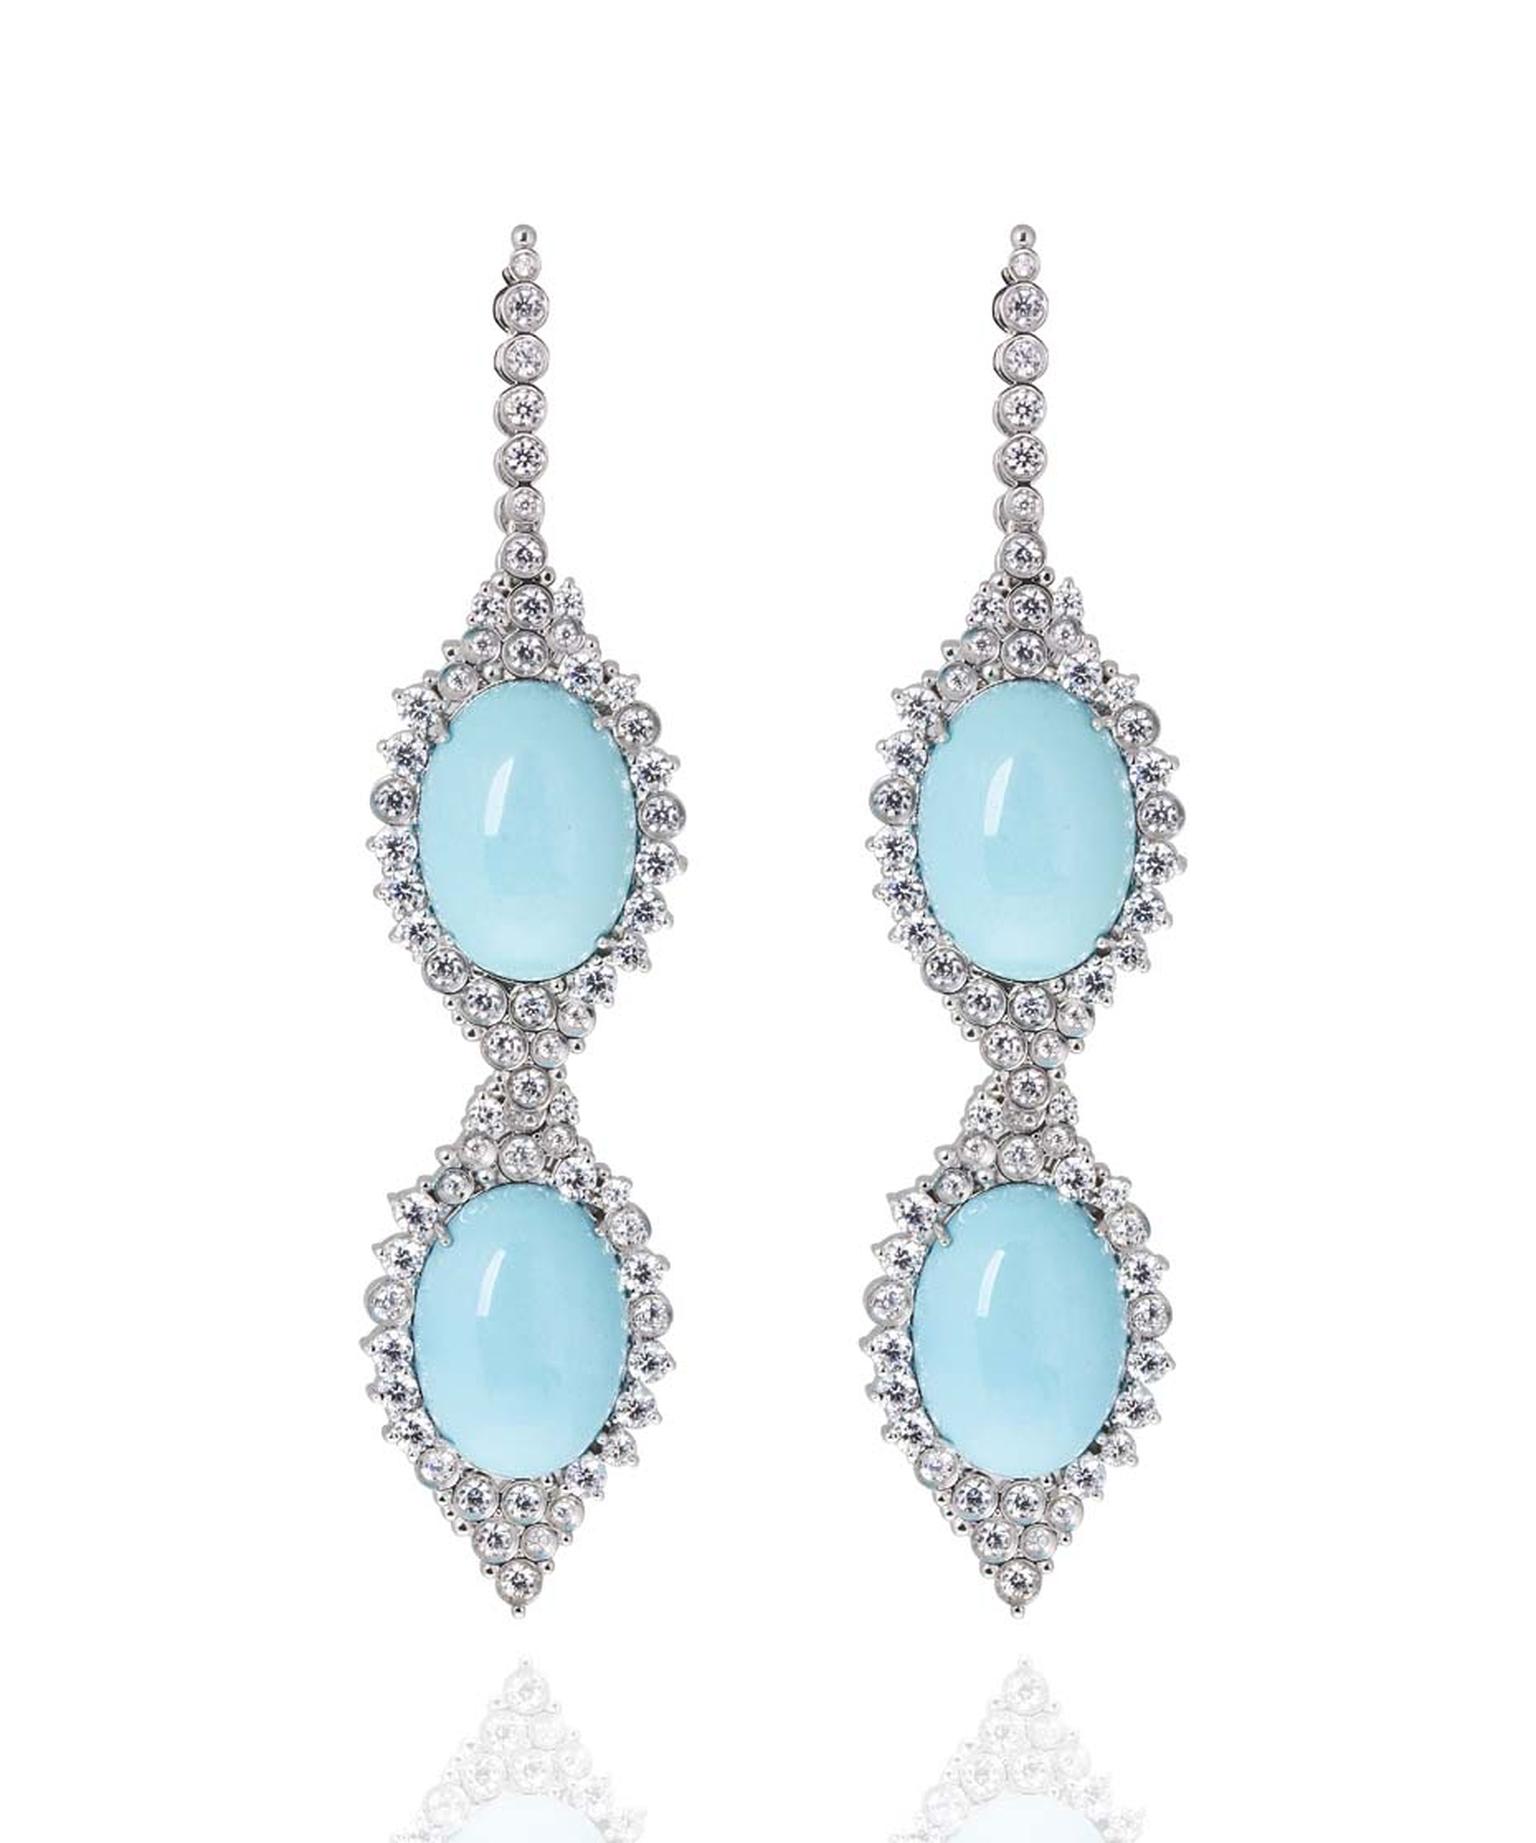 Carla Amorim earrings set with rare Sleeping Beauty turquoise in white gold, accentuated by brilliant-cut diamonds.